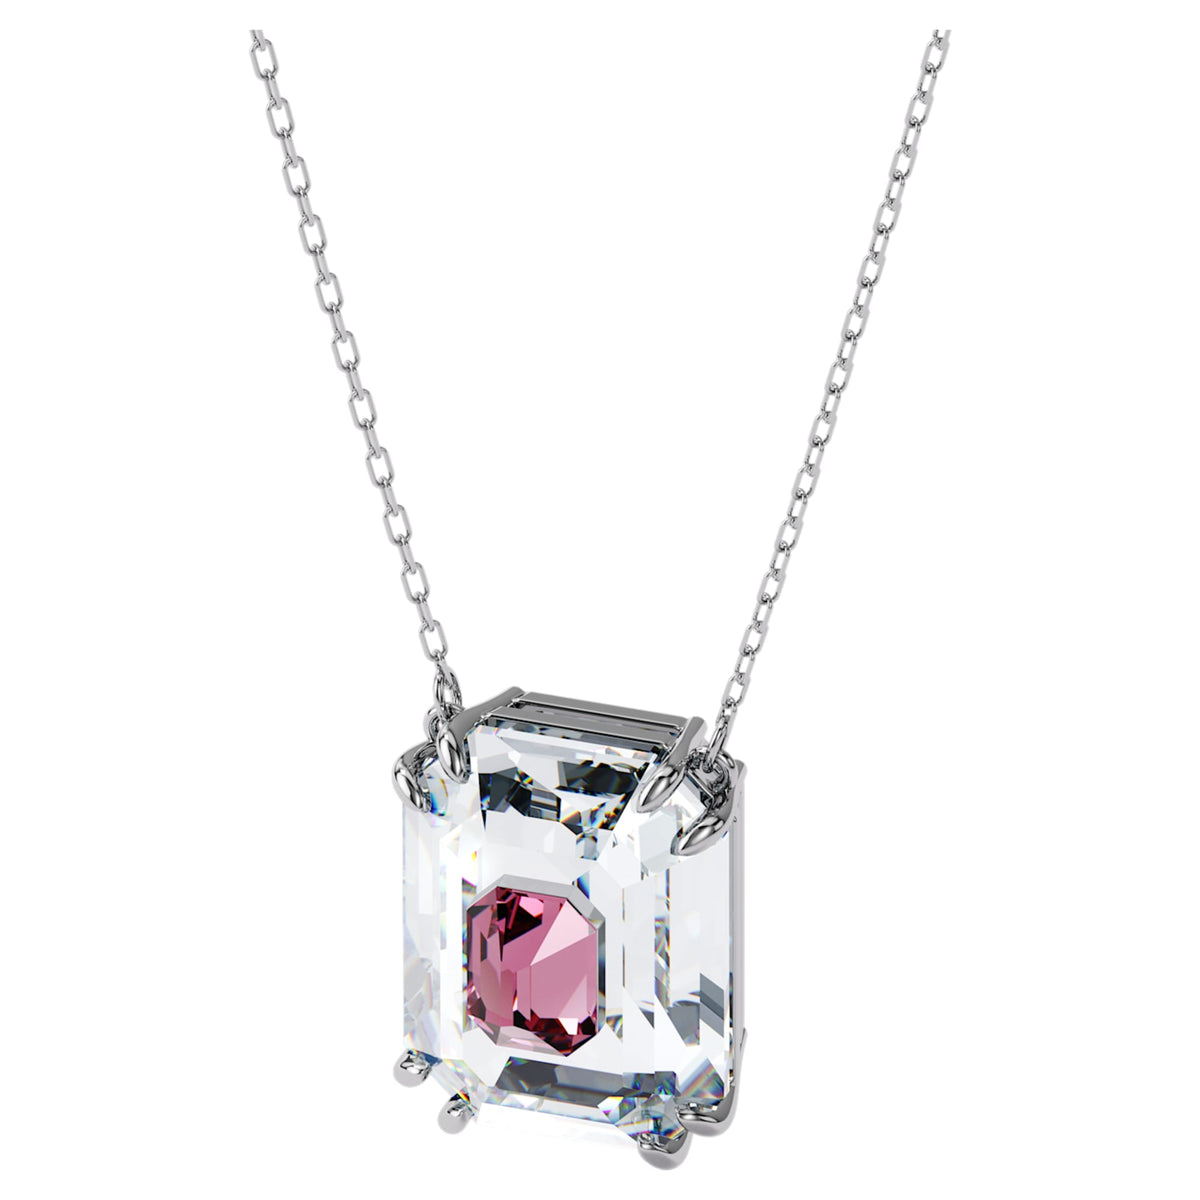 Swarovski Pendant Necklace, Geometric Astral Pink, Rose Gold Tone Plated  Setting, from the Curiosa Collection : Amazon.co.uk: Fashion